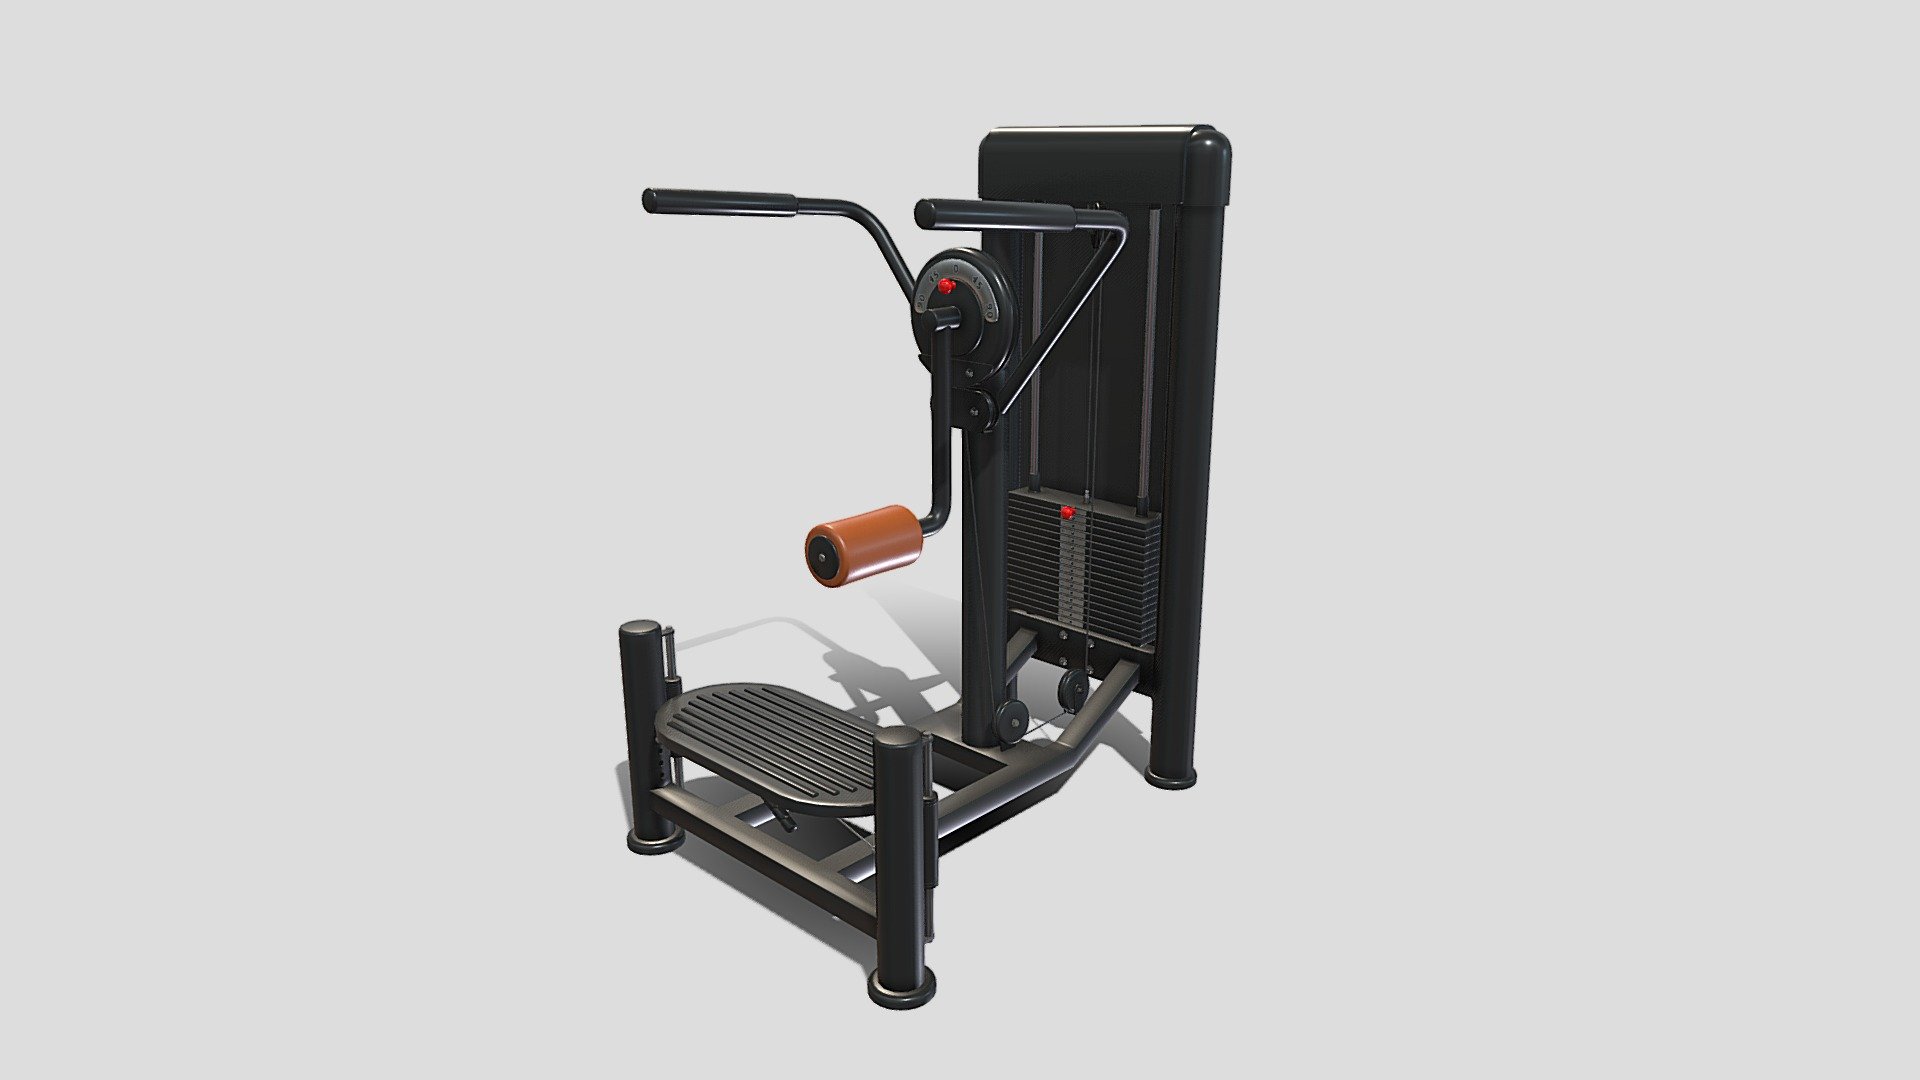 Gym machine 3d model built to real size, rendered with Cycles in Blender, as per seen on attached images. 

File formats:
-.blend, rendered with cycles, as seen in the images;
-.obj, with materials applied;
-.dae, with materials applied;
-.fbx, with materials applied;
-.stl;

Files come named appropriately and split by file format.

3D Software:
The 3D model was originally created in Blender 3.1 and rendered with Cycles.

Materials and textures:
The models have materials applied in all formats, and are ready to import and render.
Materials are image based using PBR, the model comes with five 4k png image textures.

Preview scenes:
The preview images are rendered in Blender using its built-in render engine &lsquo;Cycles'.
Note that the blend files come directly with the rendering scene included and the render command will generate the exact result as seen in previews.

General:
The models are built mostly out of quads.

For any problems please feel free to contact me.

Don't forget to rate and enjoy! - Multi hip machine - Buy Royalty Free 3D model by dragosburian 3d model